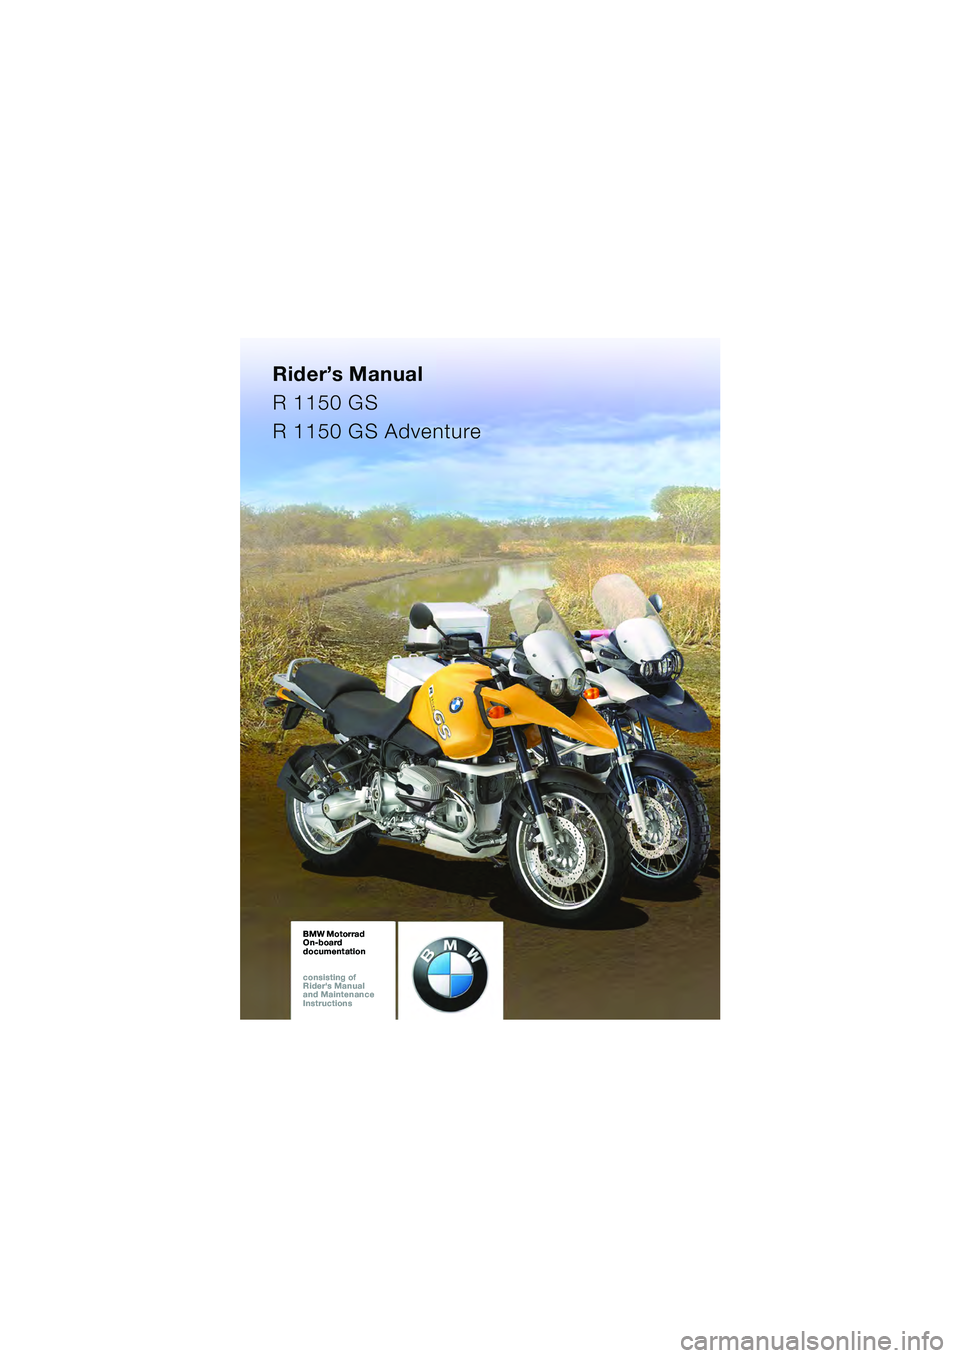 BMW MOTORRAD R 1150 GS Adventure 2002  Riders Manual (in English) Rider’s Manual
R 1150 GS
R 1150 GS Adventure
BMW Motorrad
On-board  
documentation
consisting of  
Riders Manual  
and Maintenance  
InstructionsBMW Motorrad
On-board  
documentation
consisting of 